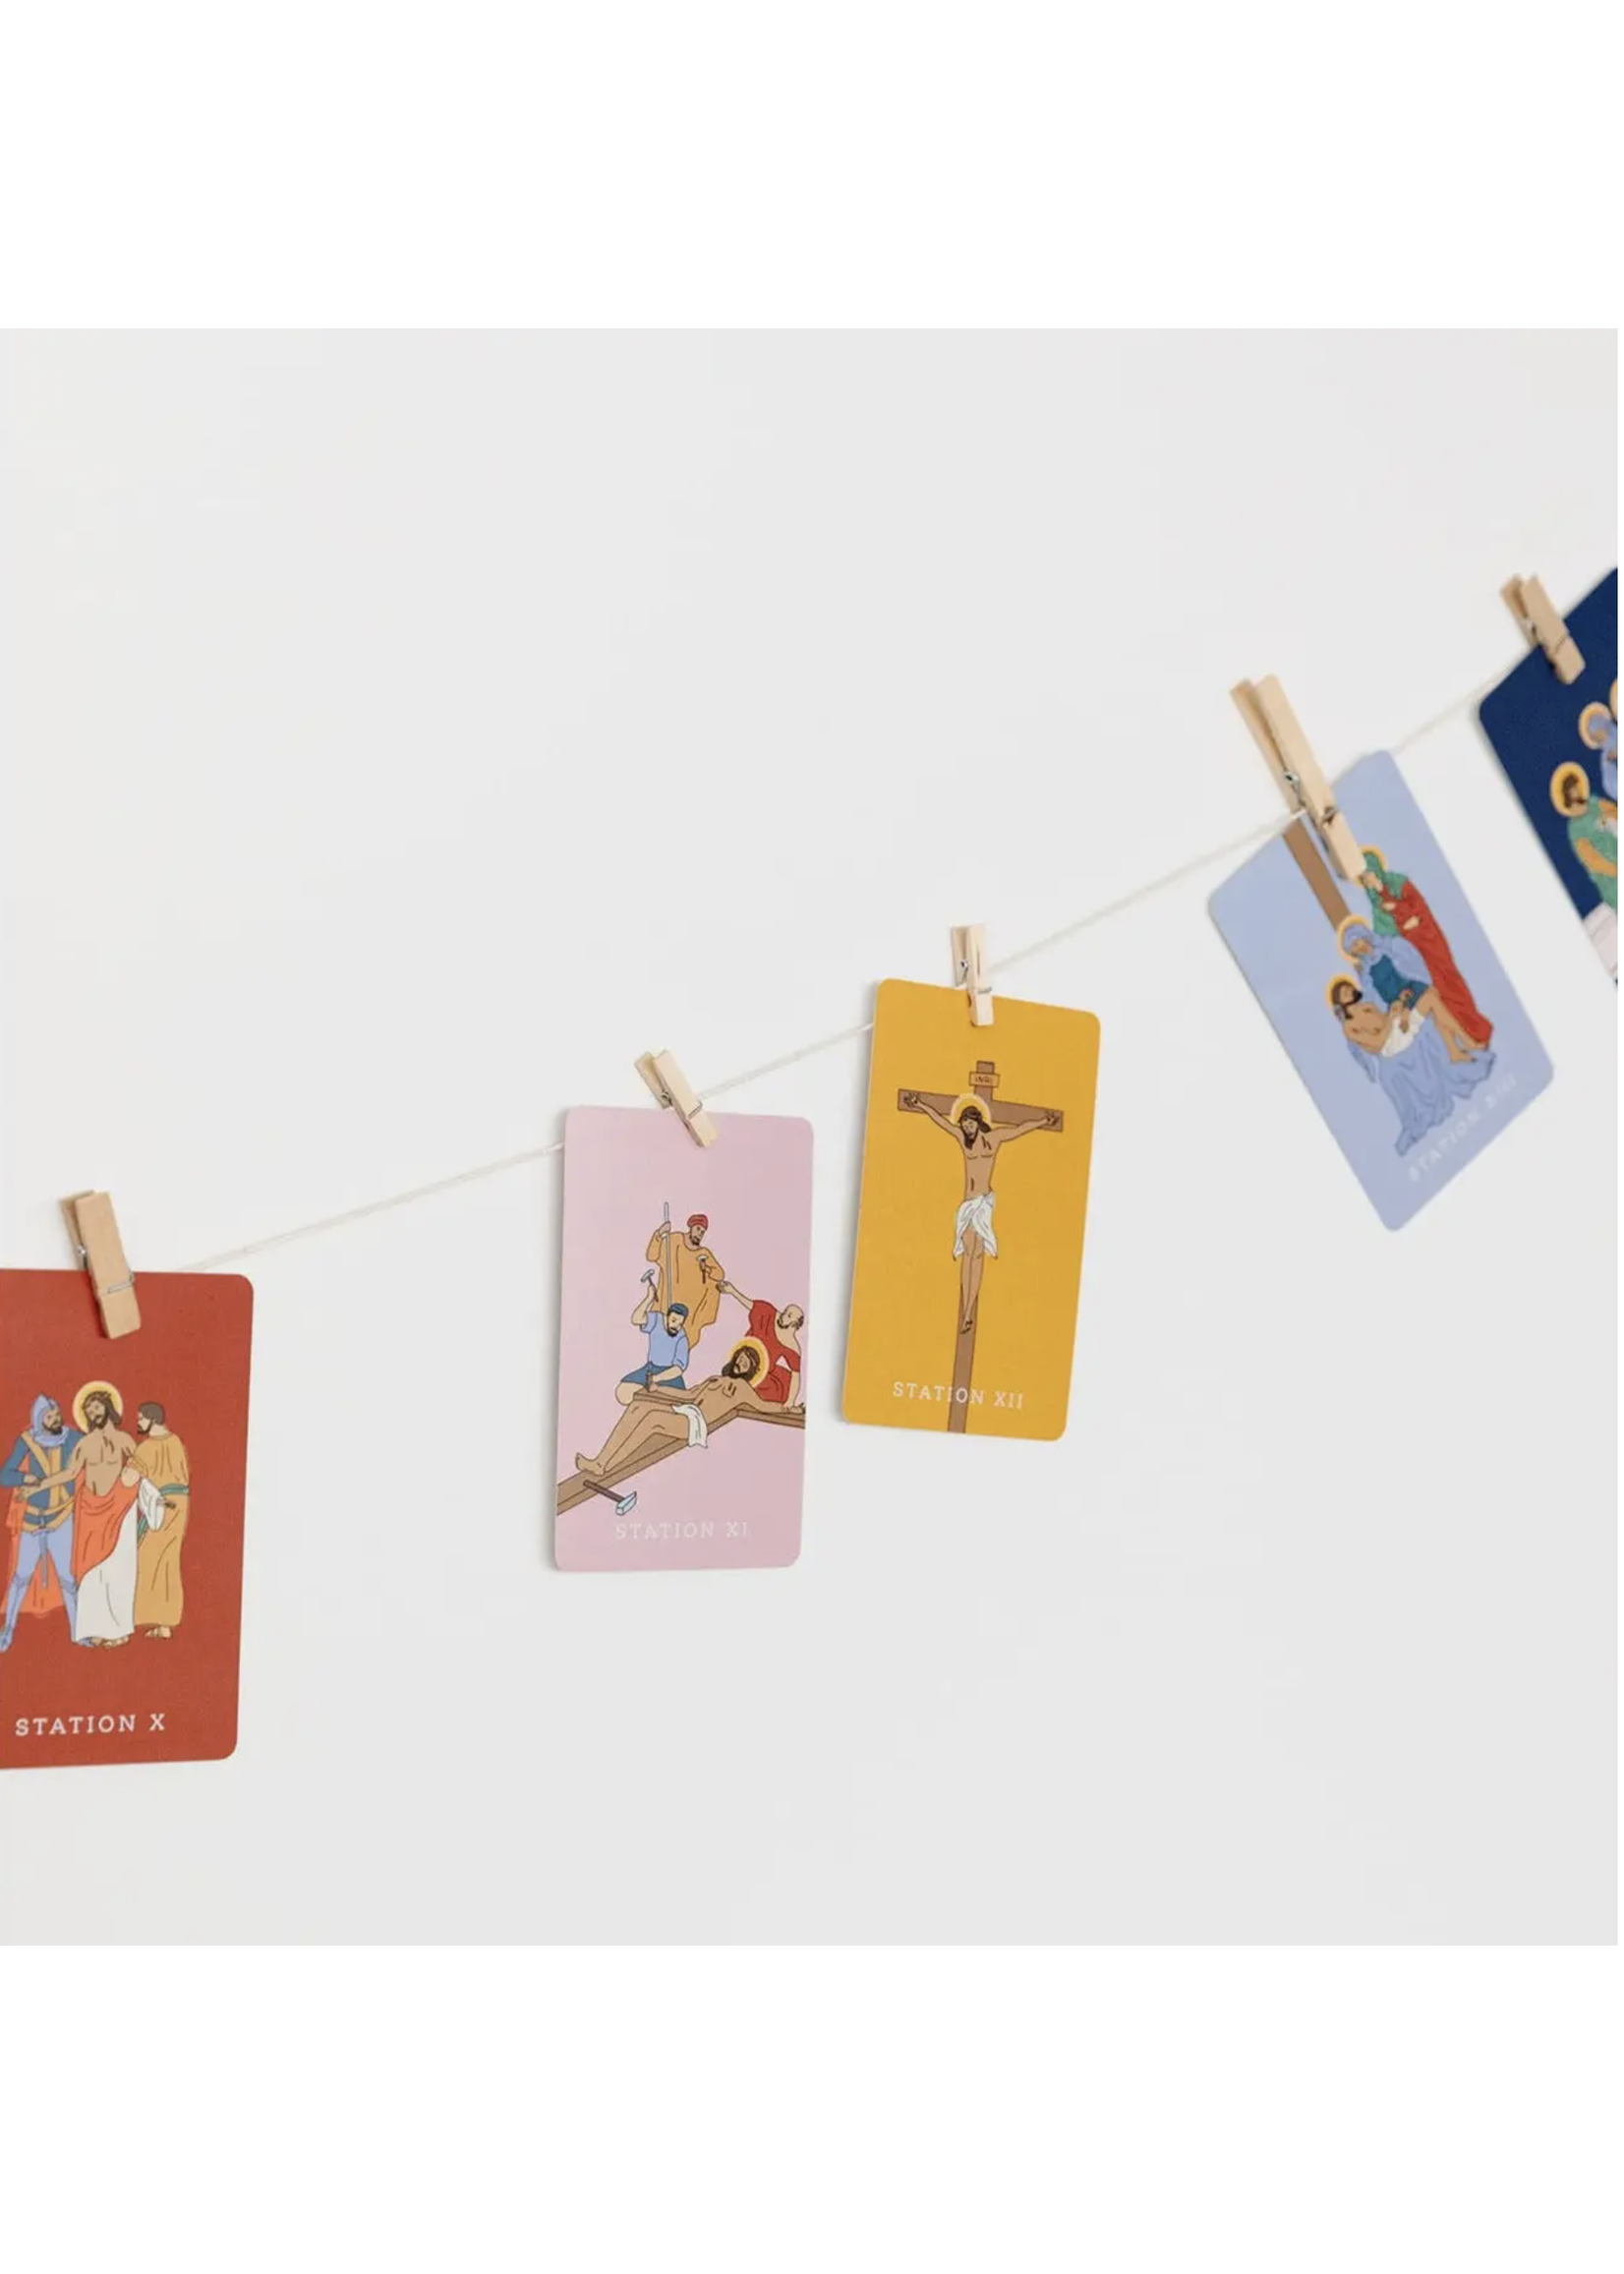 Catholic Family Crate Stations of the Cross Cards